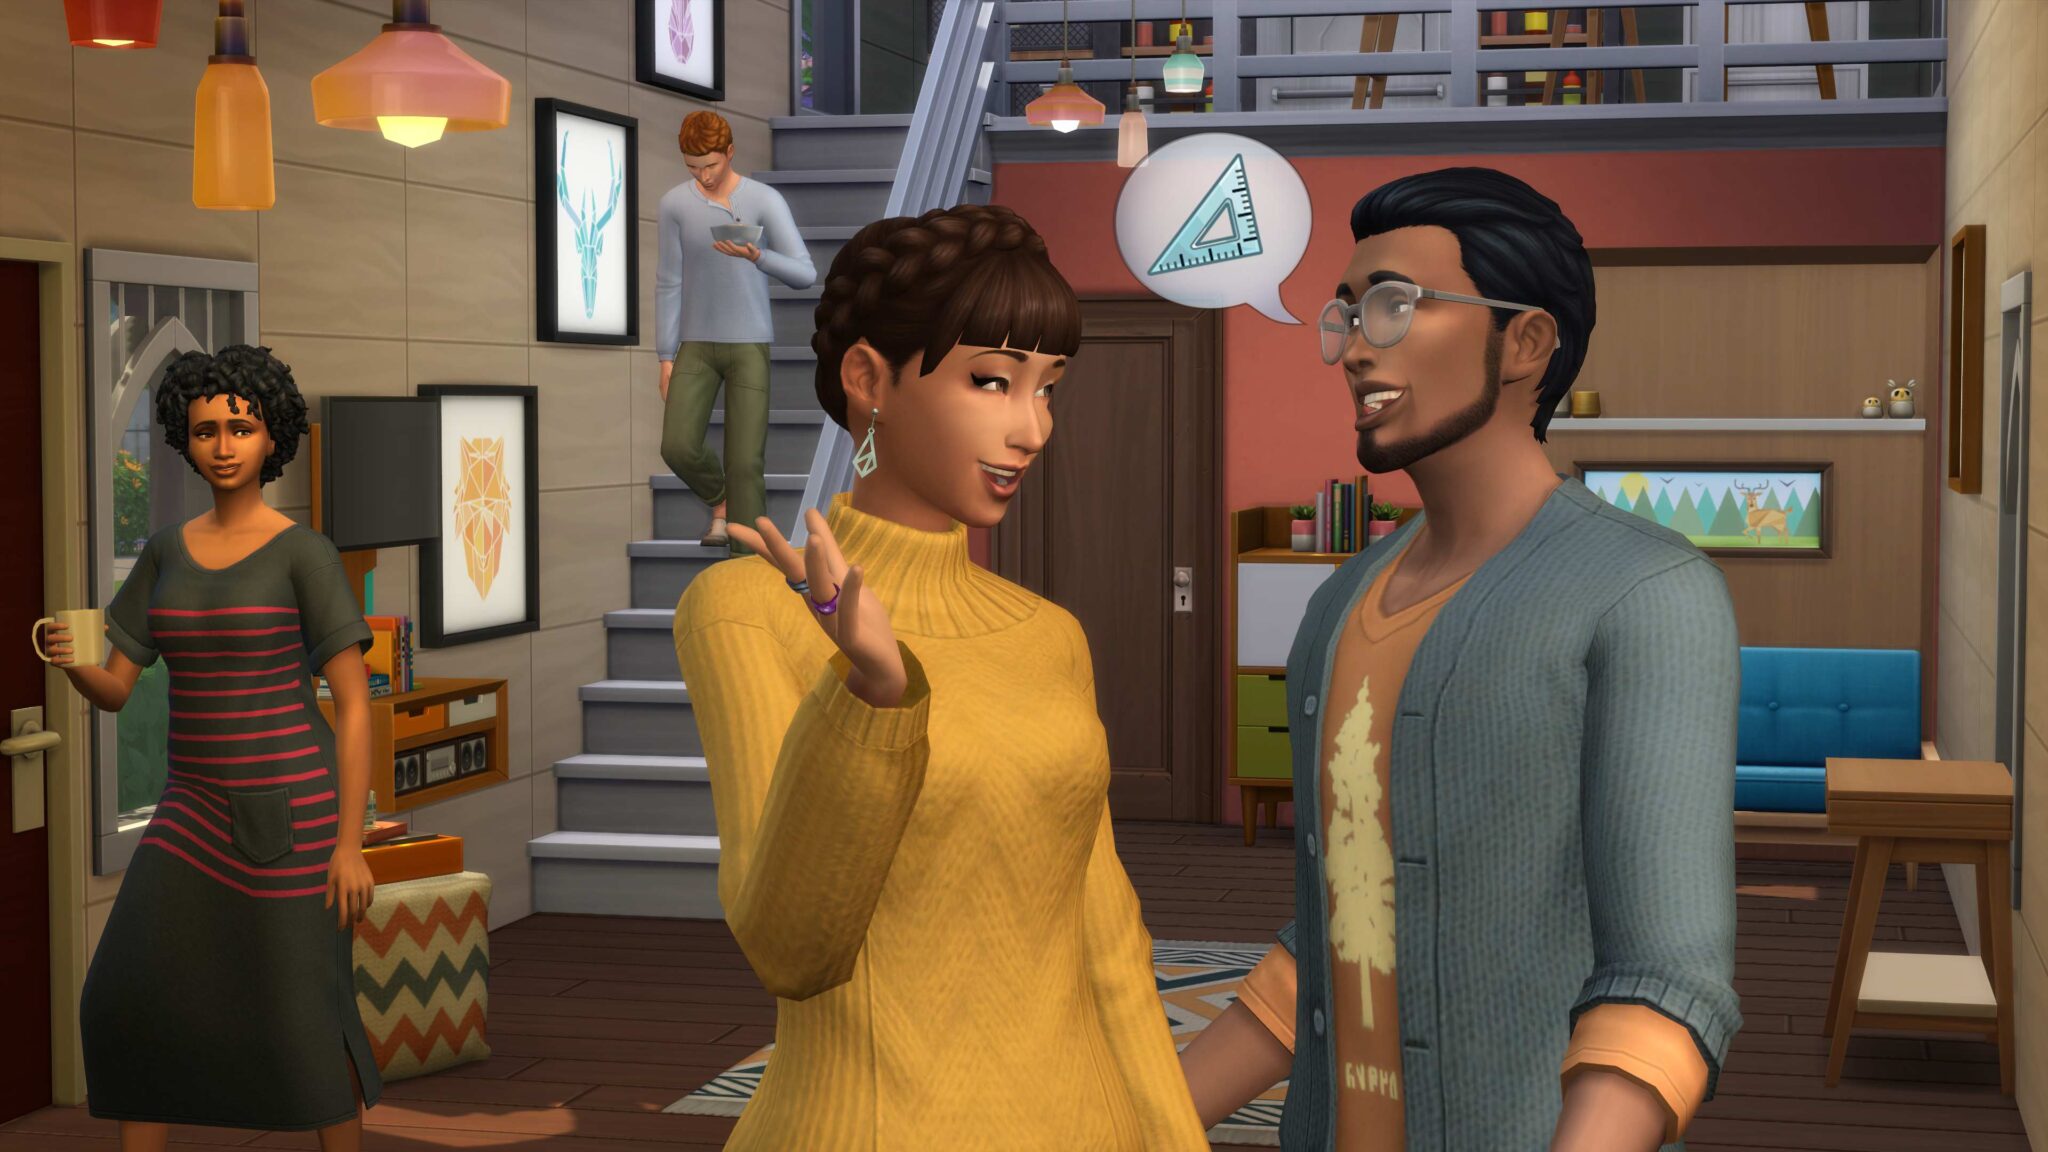 The Sims 4 Cheats & Codes: The Complete List